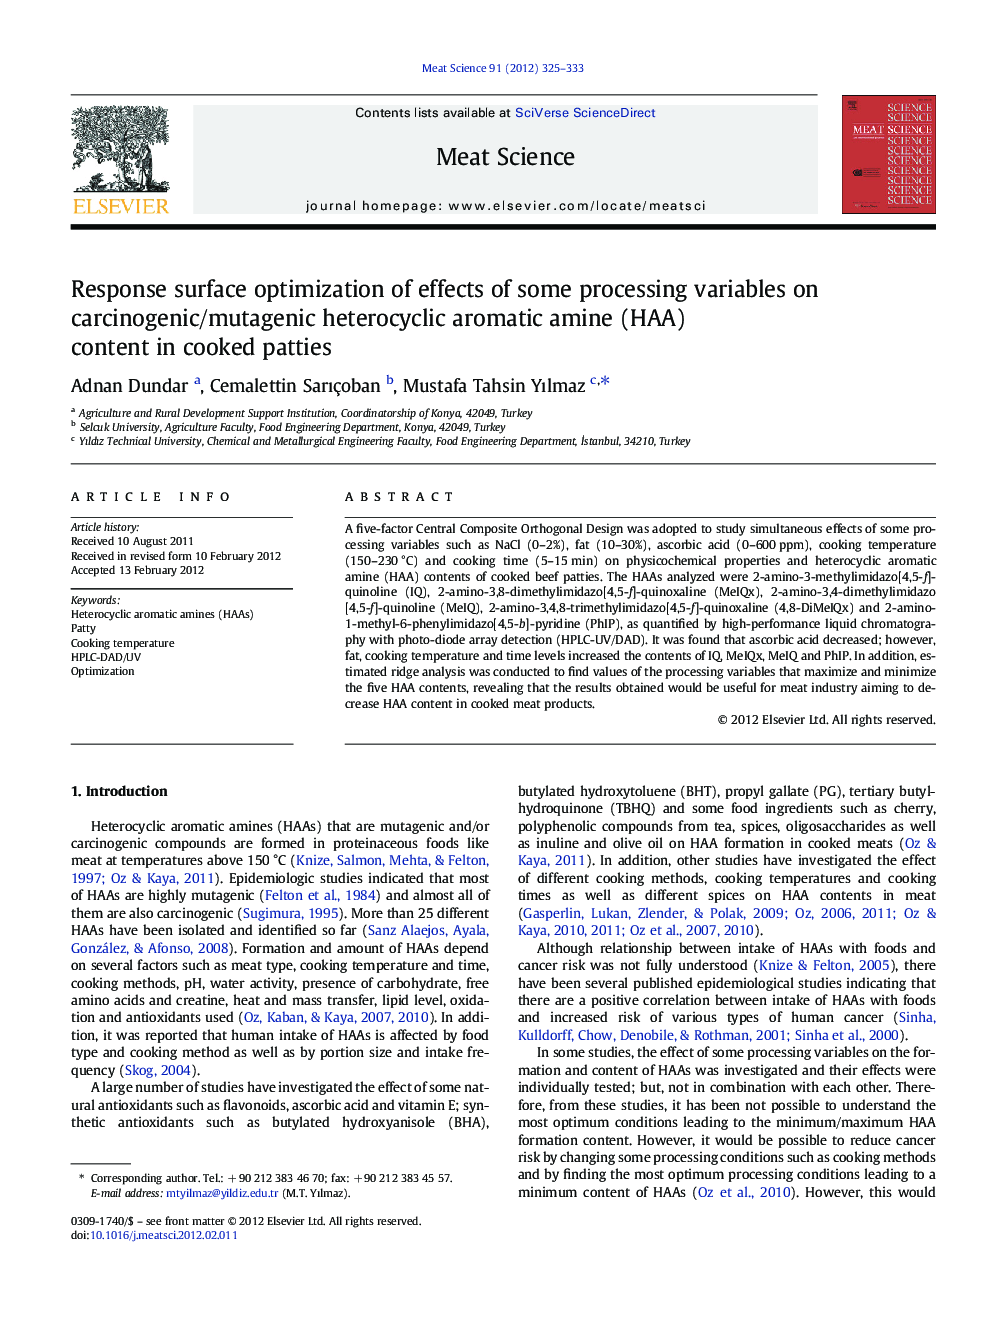 Response surface optimization of effects of some processing variables on carcinogenic/mutagenic heterocyclic aromatic amine (HAA) content in cooked patties